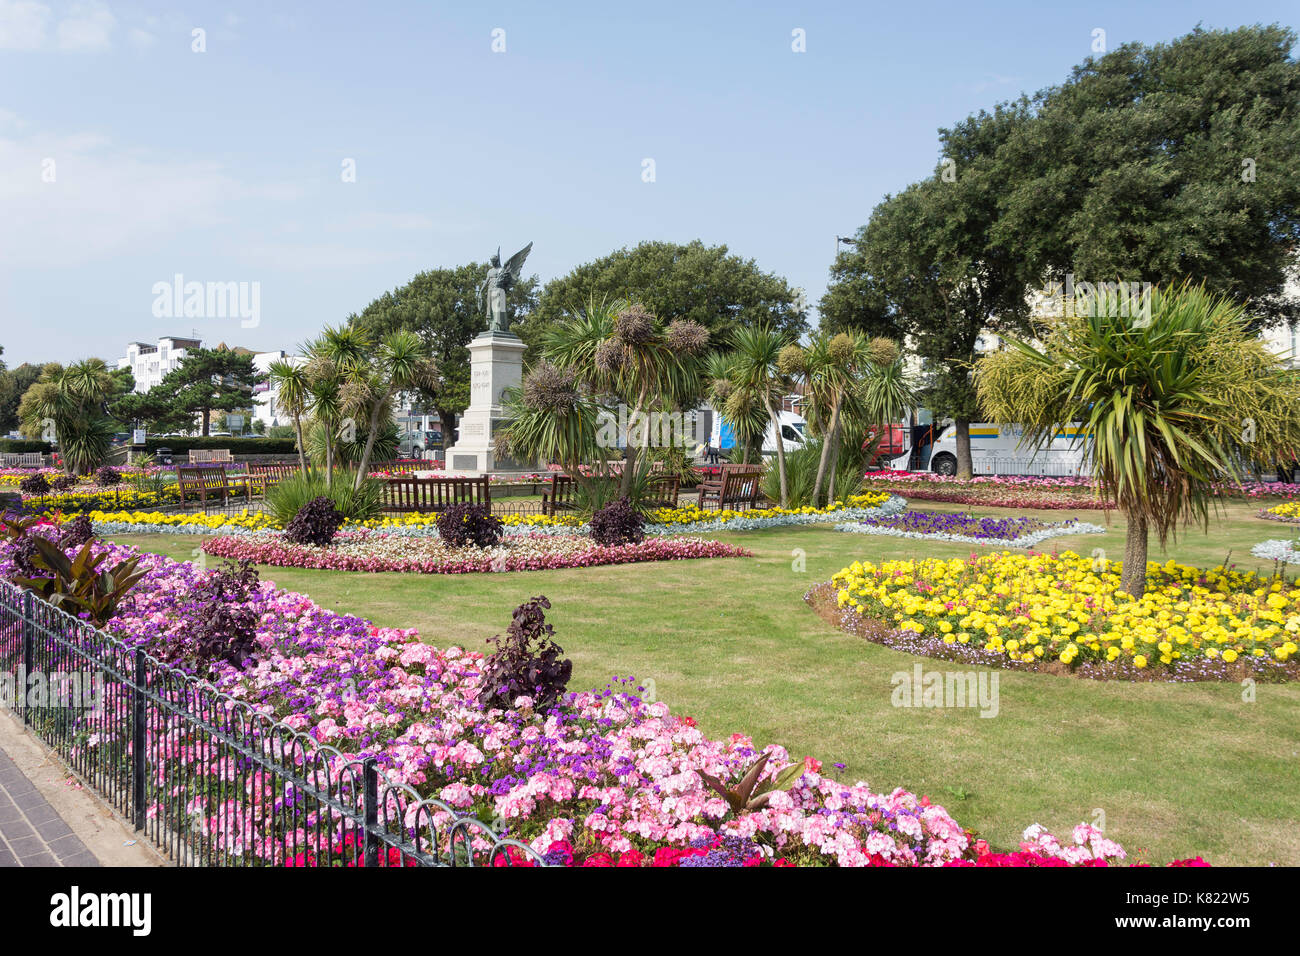 Garden of Remembrance and War Memorial, Clacton-on-Sea, Essex, England, United Kingdom Stock Photo